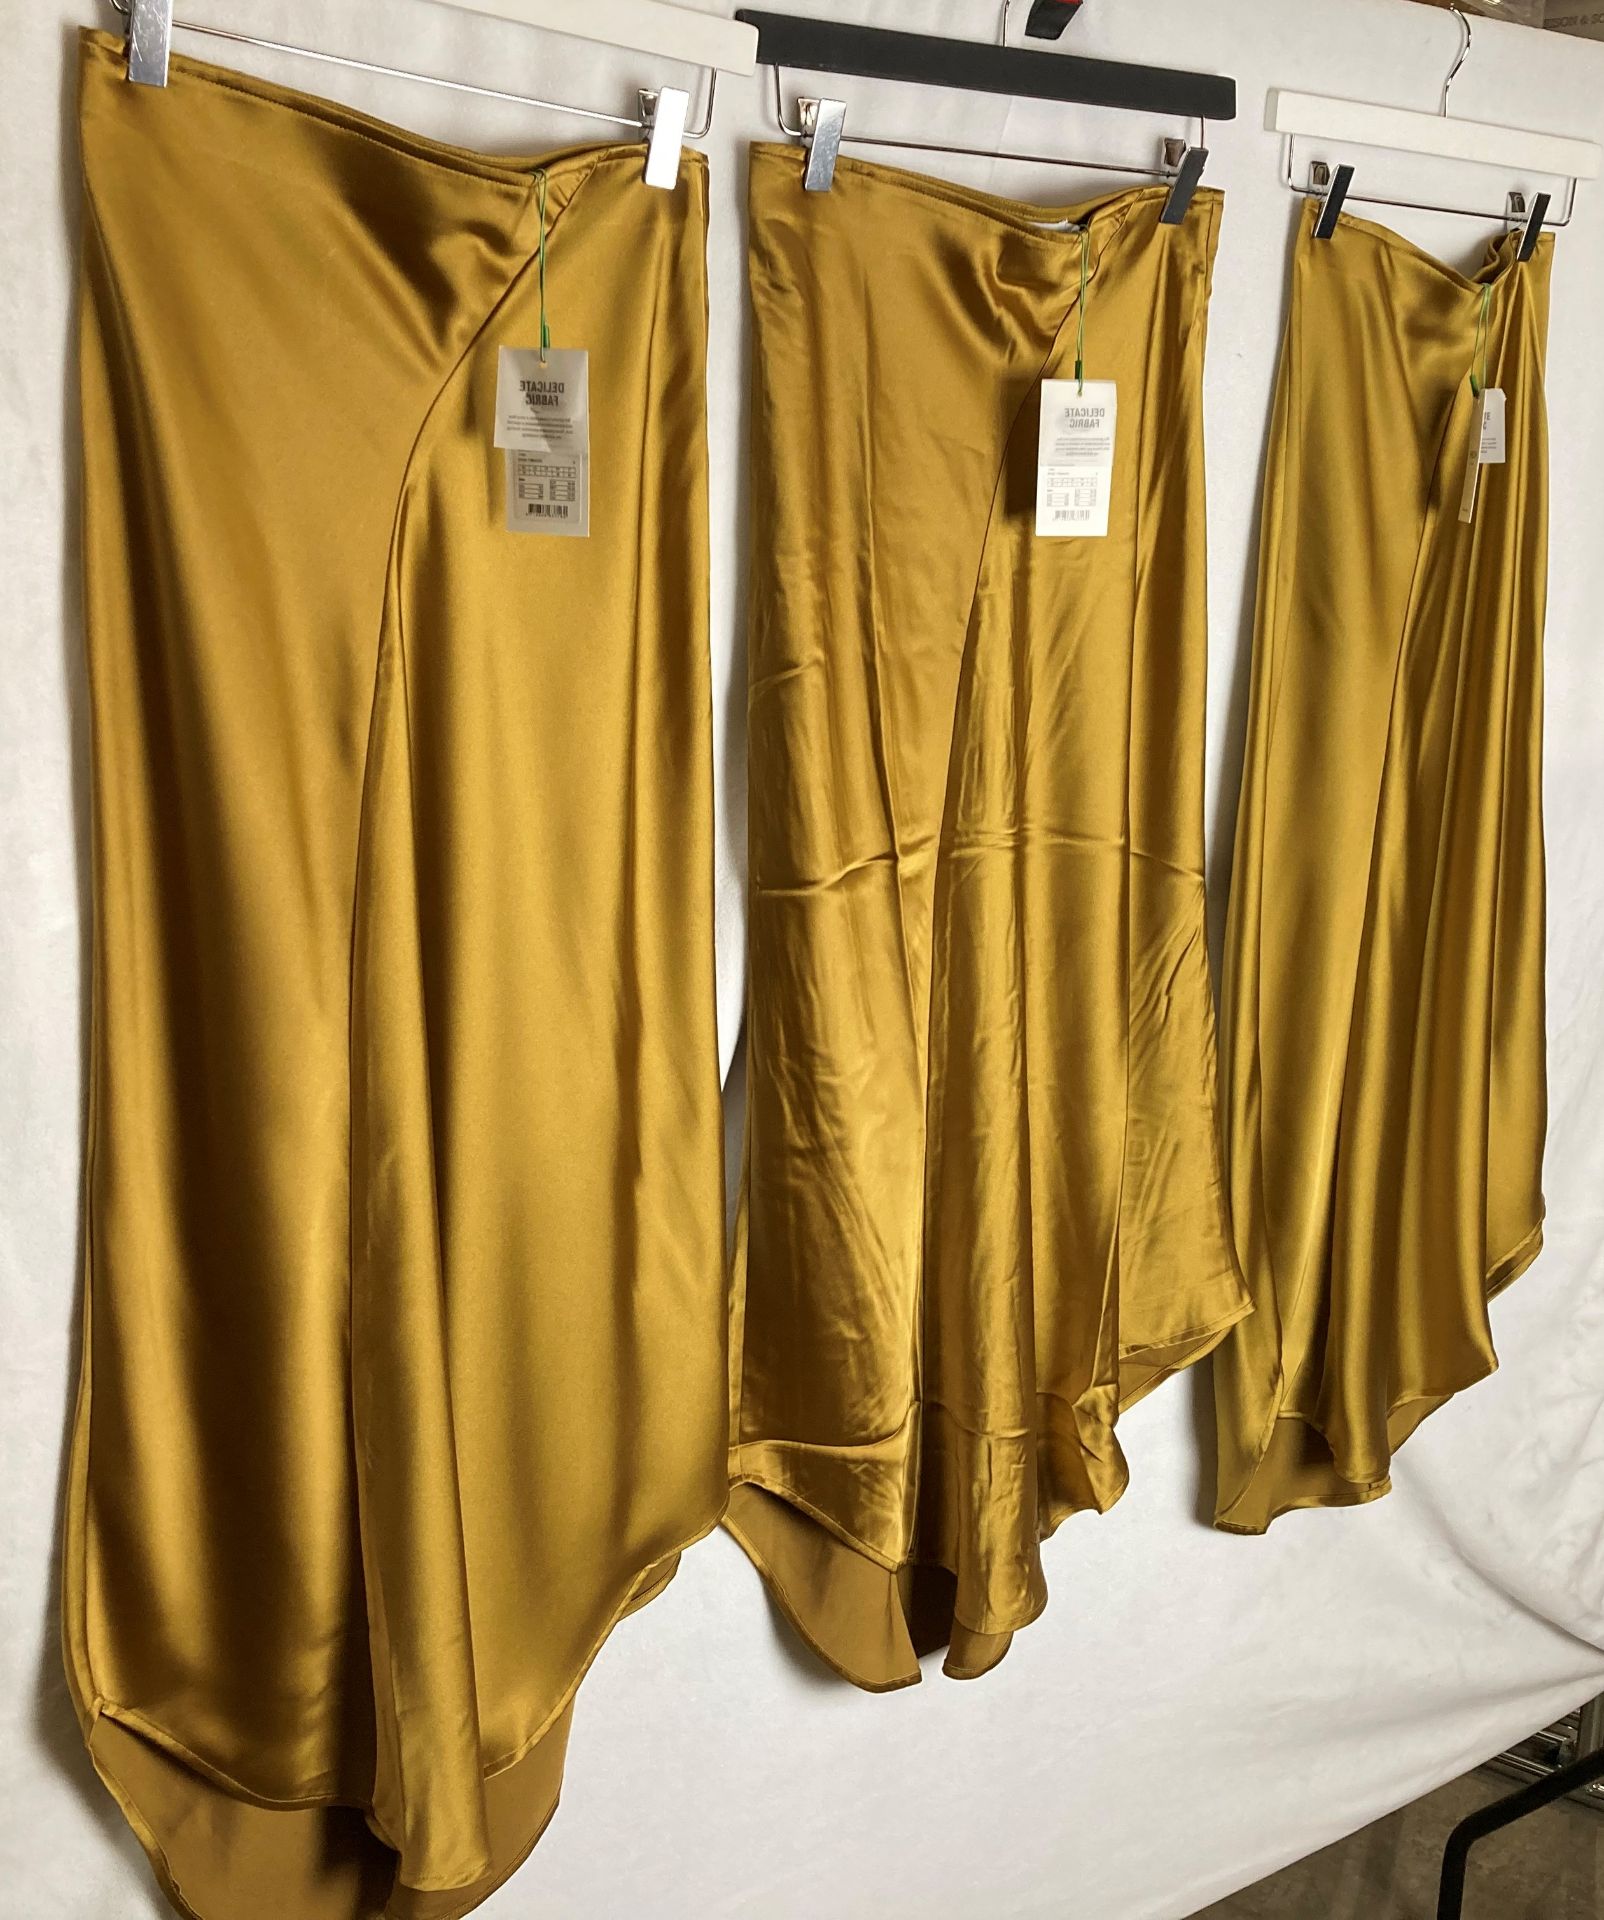 3 x MSCH ladies skirts in gold sizes XS and S UK 6 and 8 - RRP: £54.